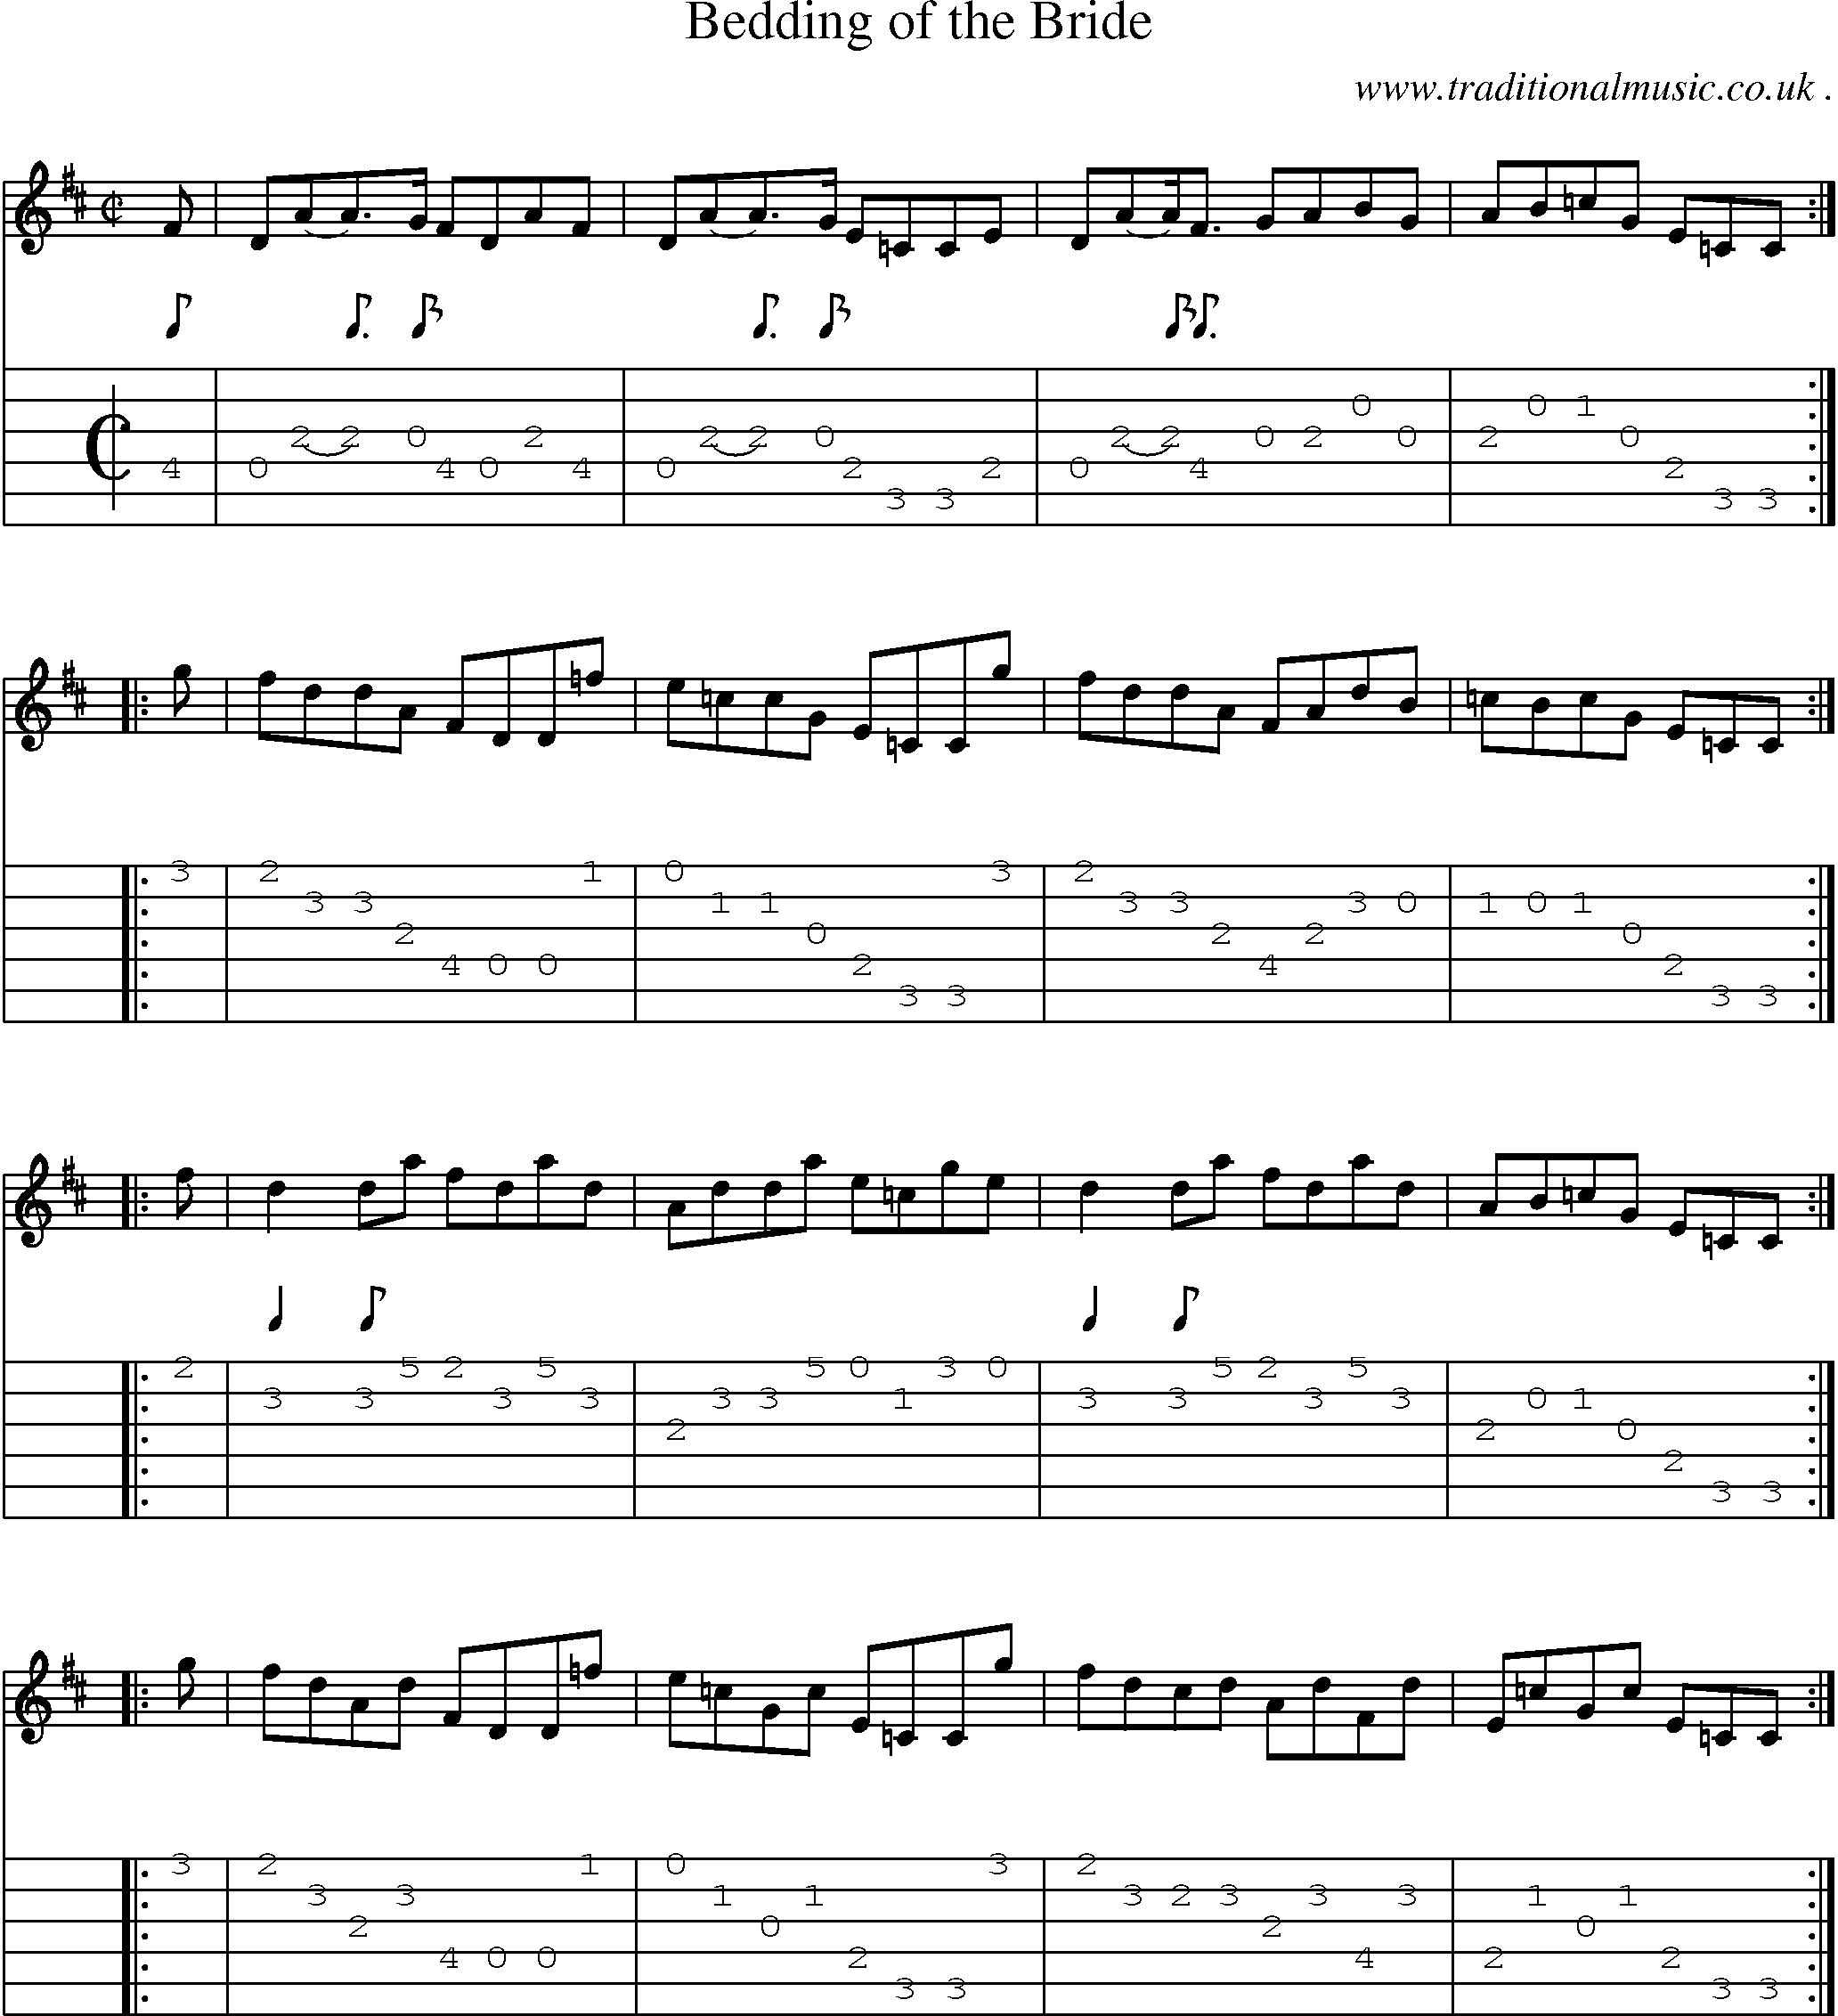 Sheet-music  score, Chords and Guitar Tabs for Bedding Of The Bride